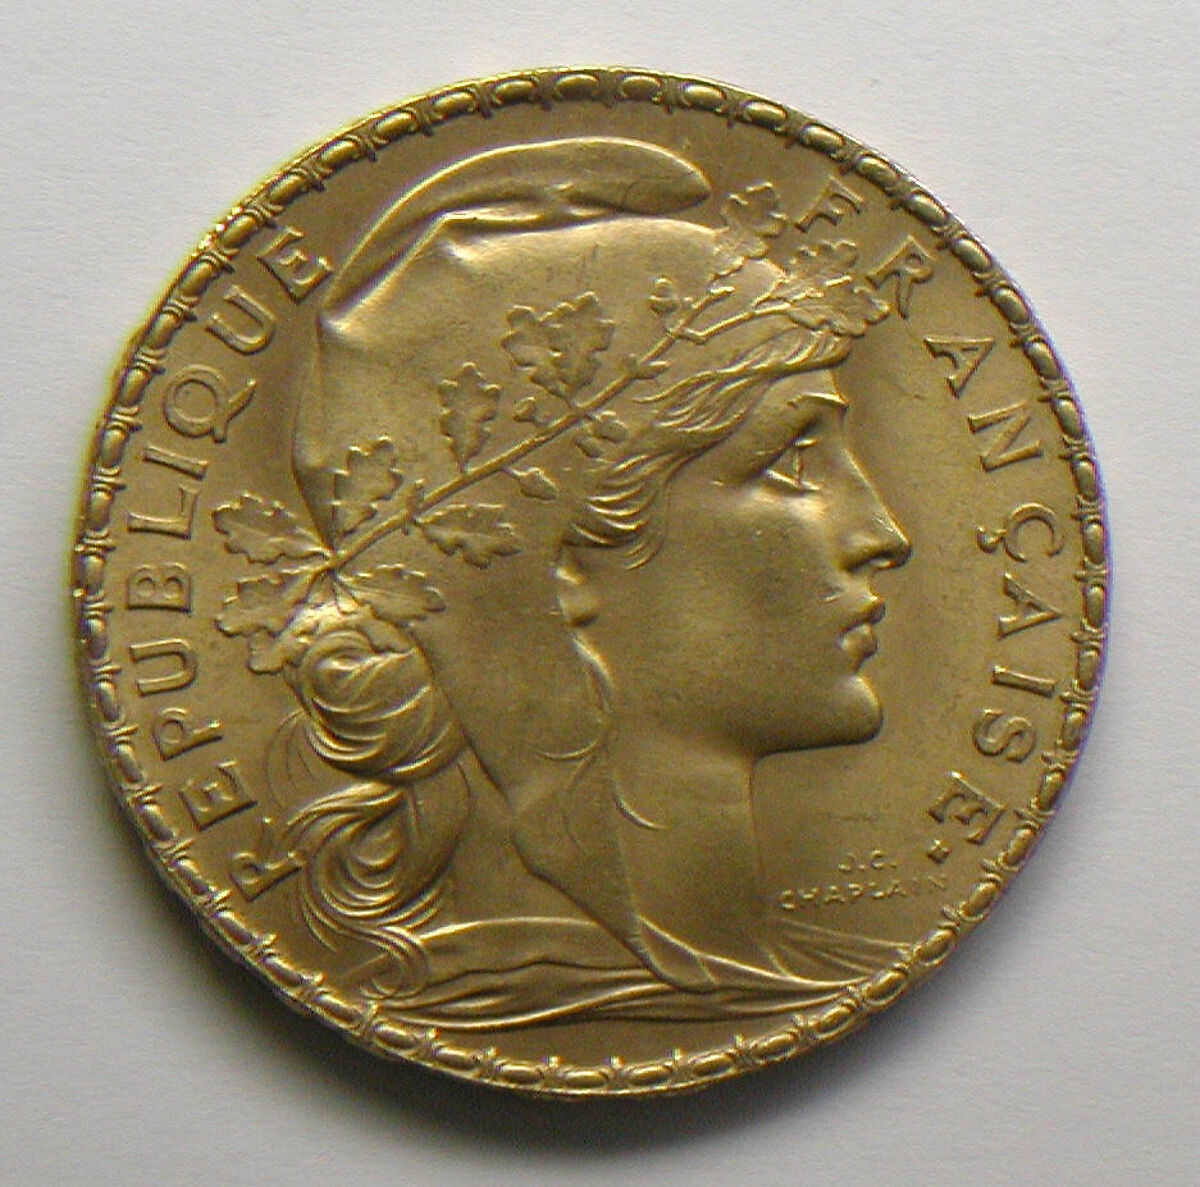 20-franc piece of the French Republic, 1907, Medalist: Jules-Clément Chaplain (French, Mortagne, Orne 1839–1909 Paris), Gold, French 